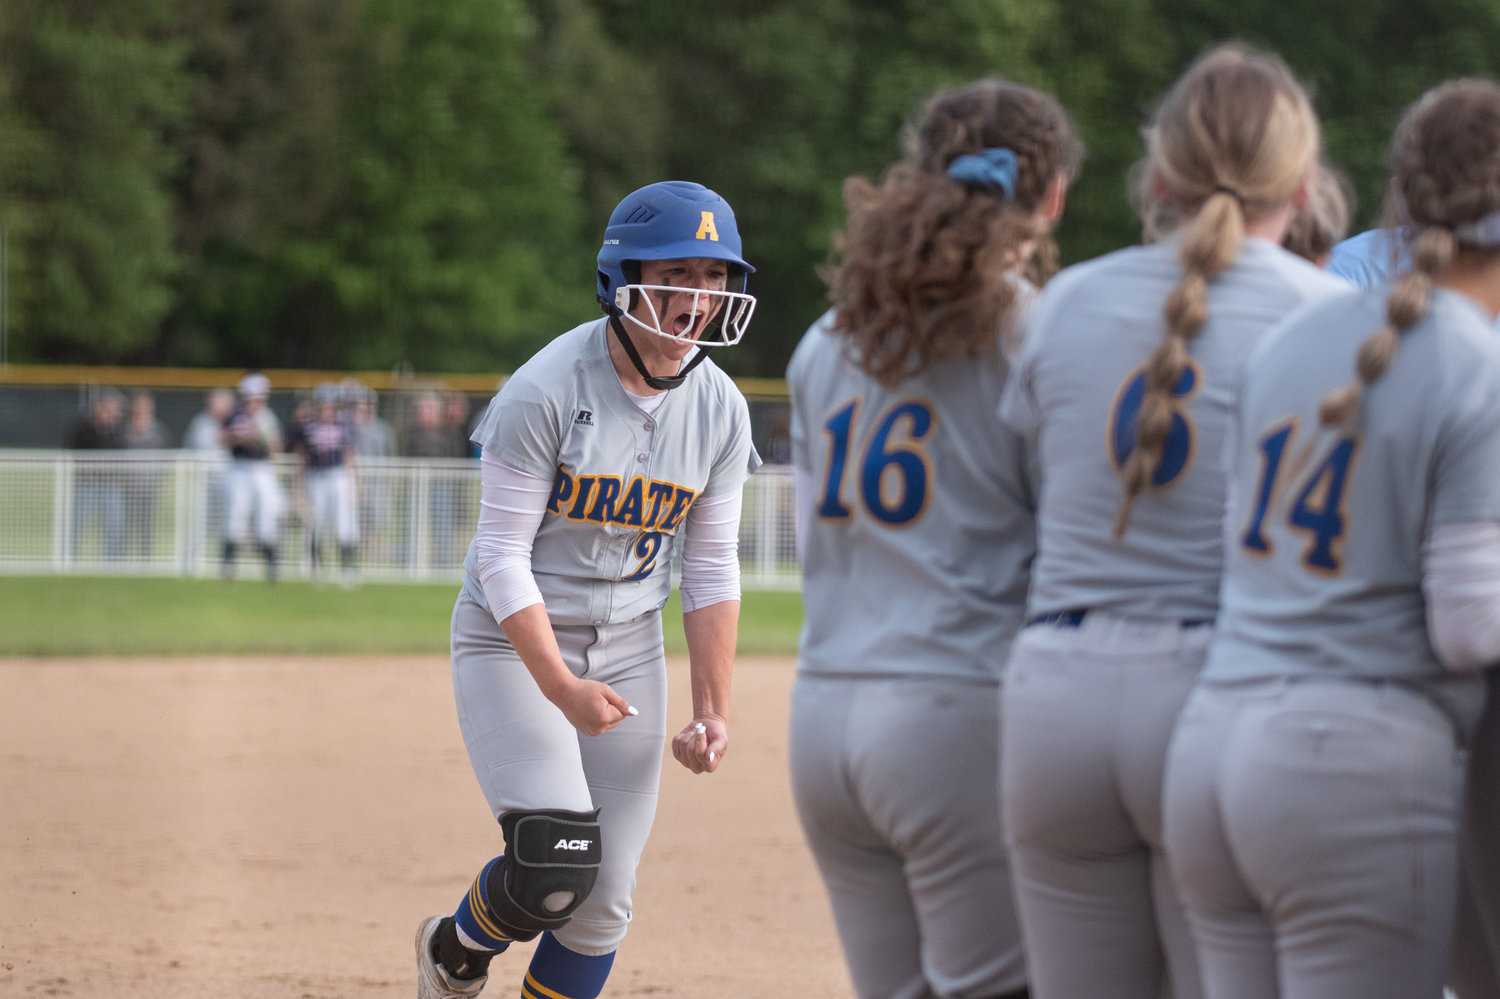 Adna's Ava Simms celebrates after a home run against PWV in the 2B District 4 softball championship game at Fort Borst Park in Centralia May 21.